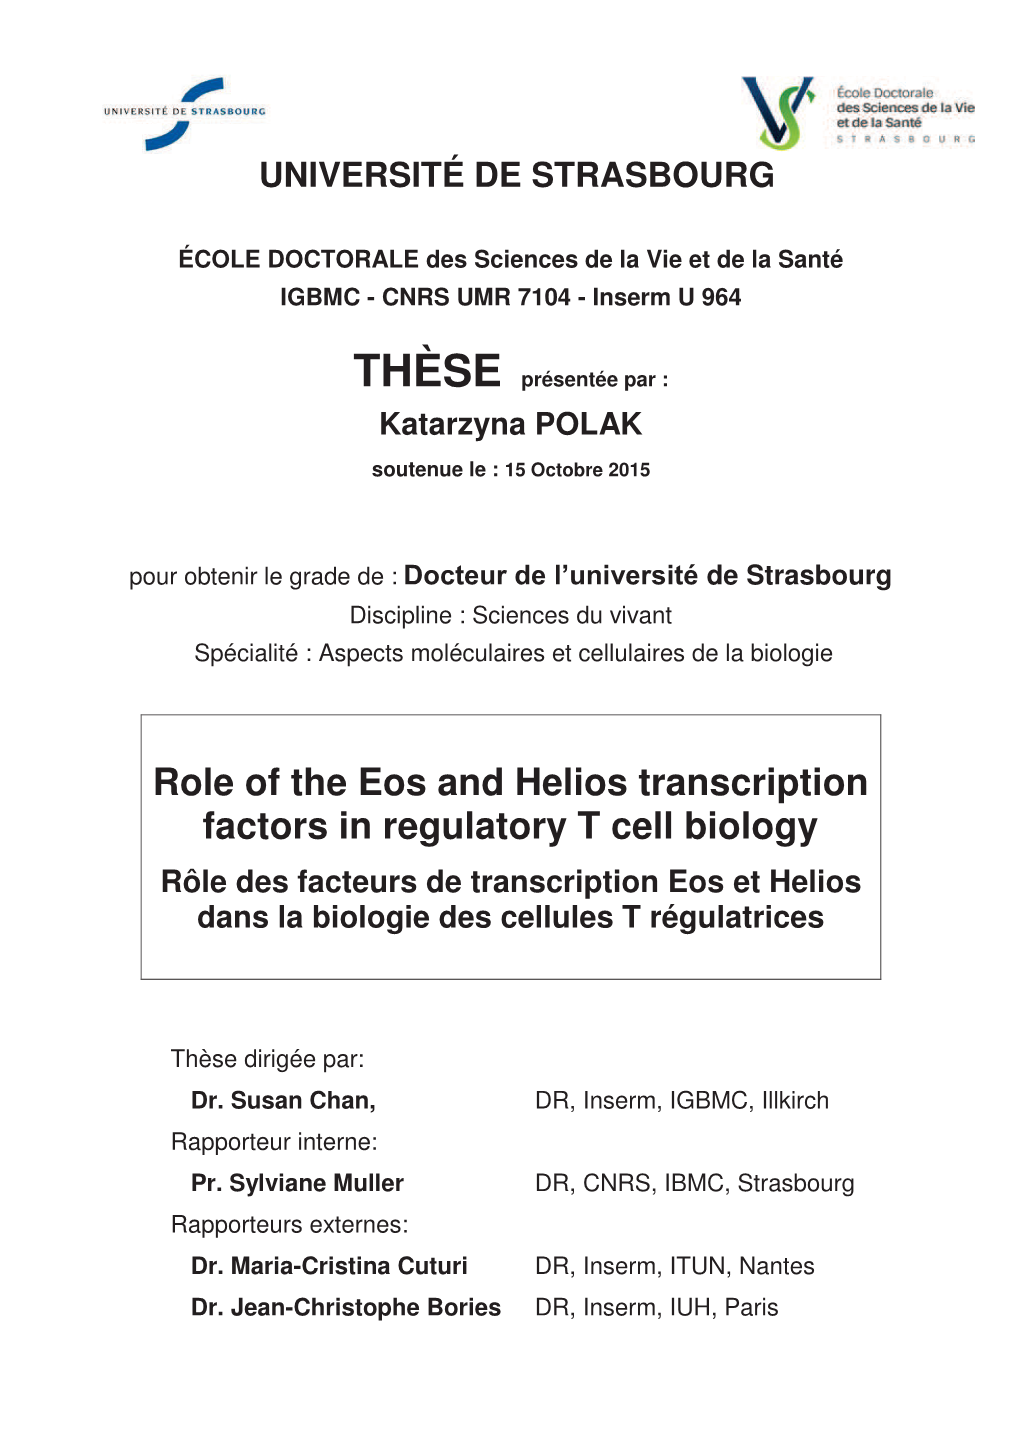 Role of the Eos and Helios Transcription Factors in Regulatory T